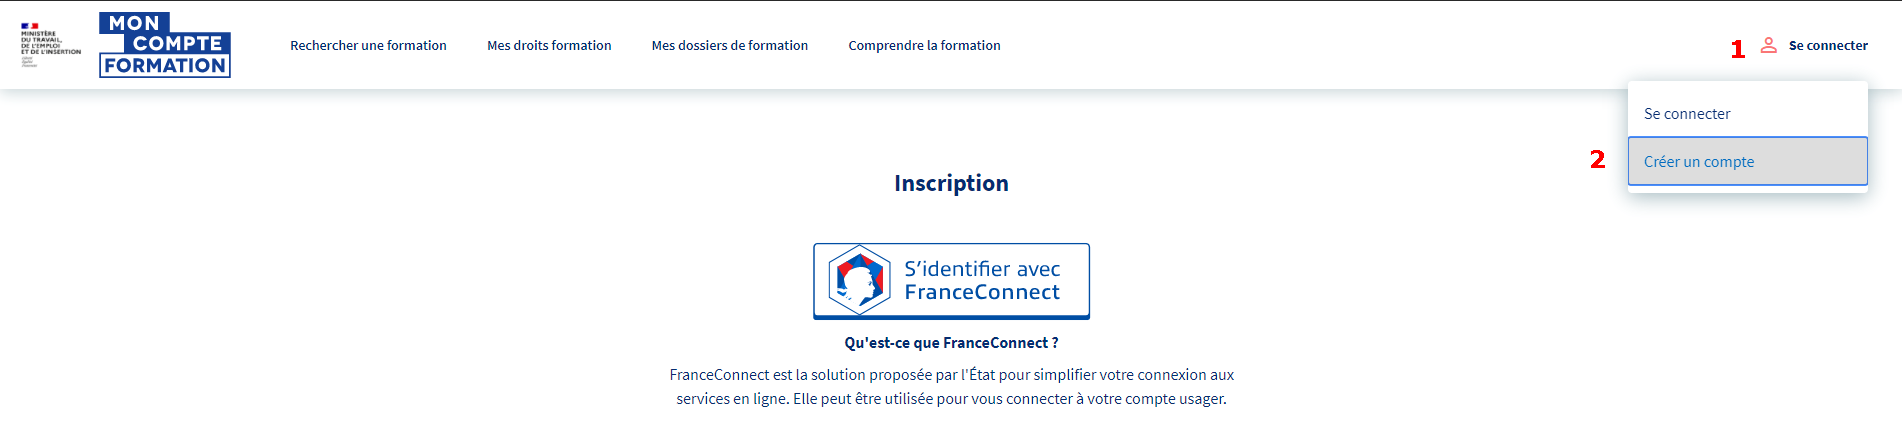 creation-cpf-france-connect